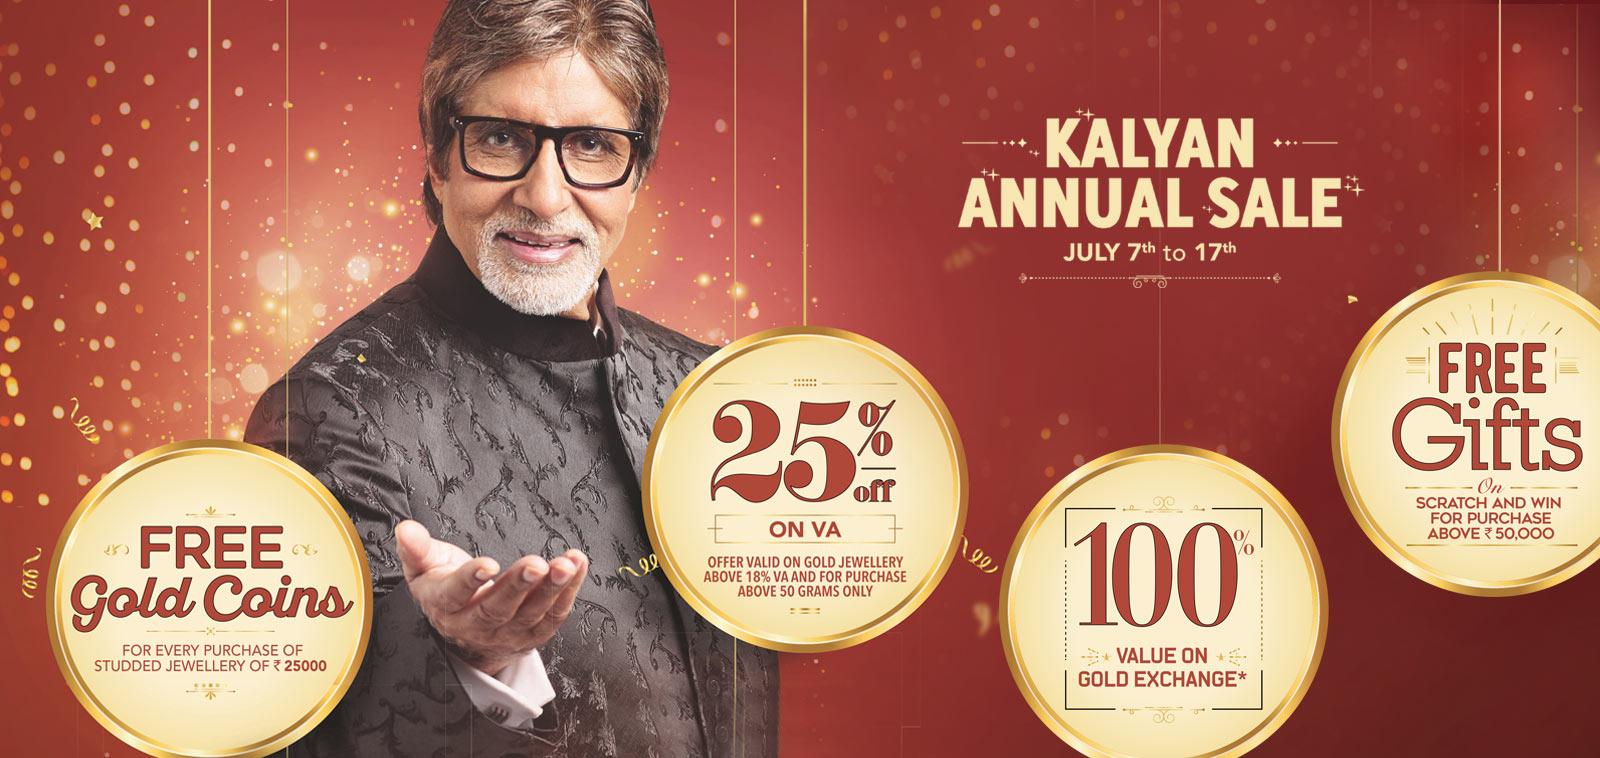 Kalyan Jewellers announces Annual Sale from July 7